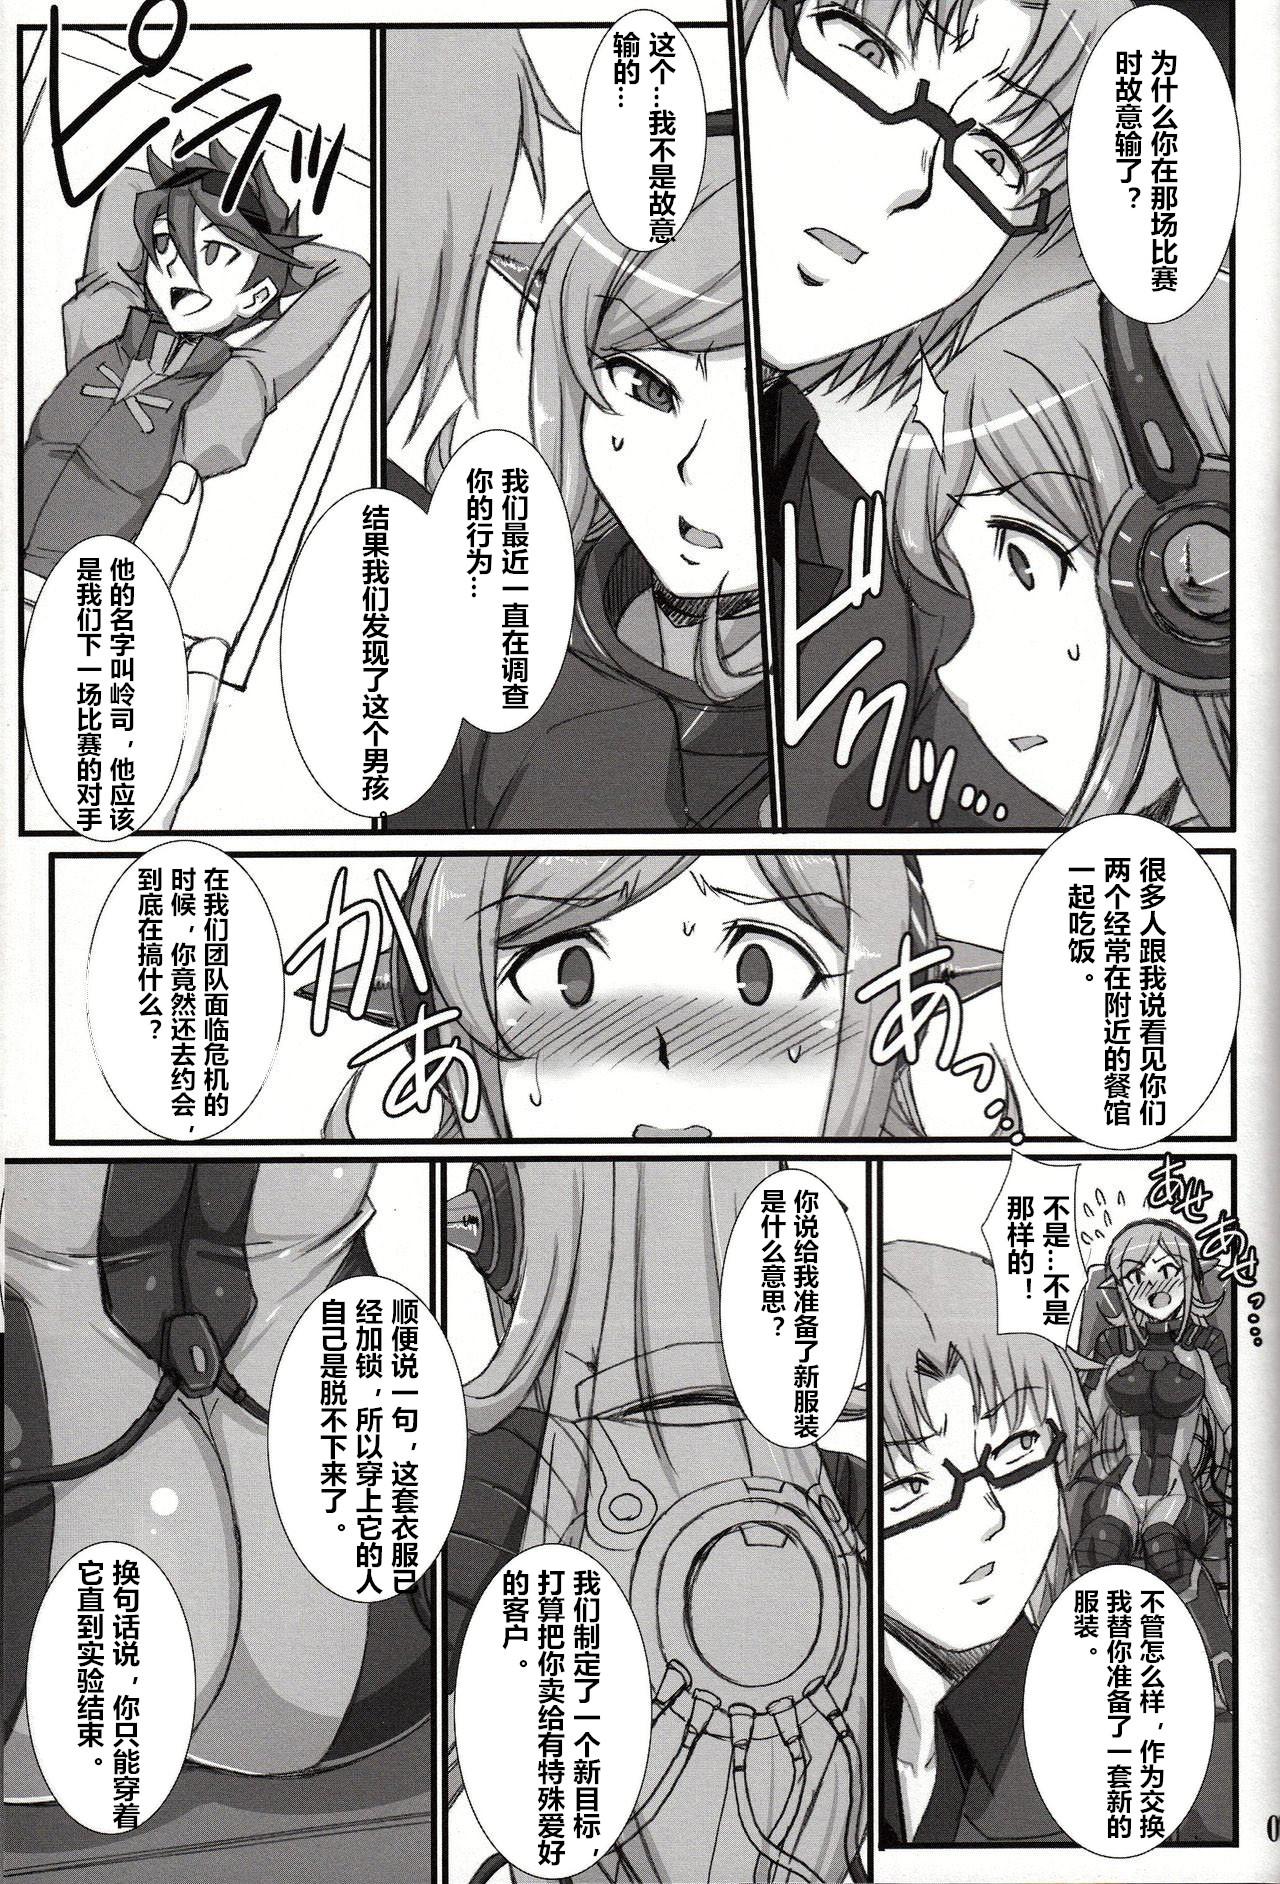 Step Mom Inexhaustible pleasure - Gundam build fighters Hairy Sexy - Page 6